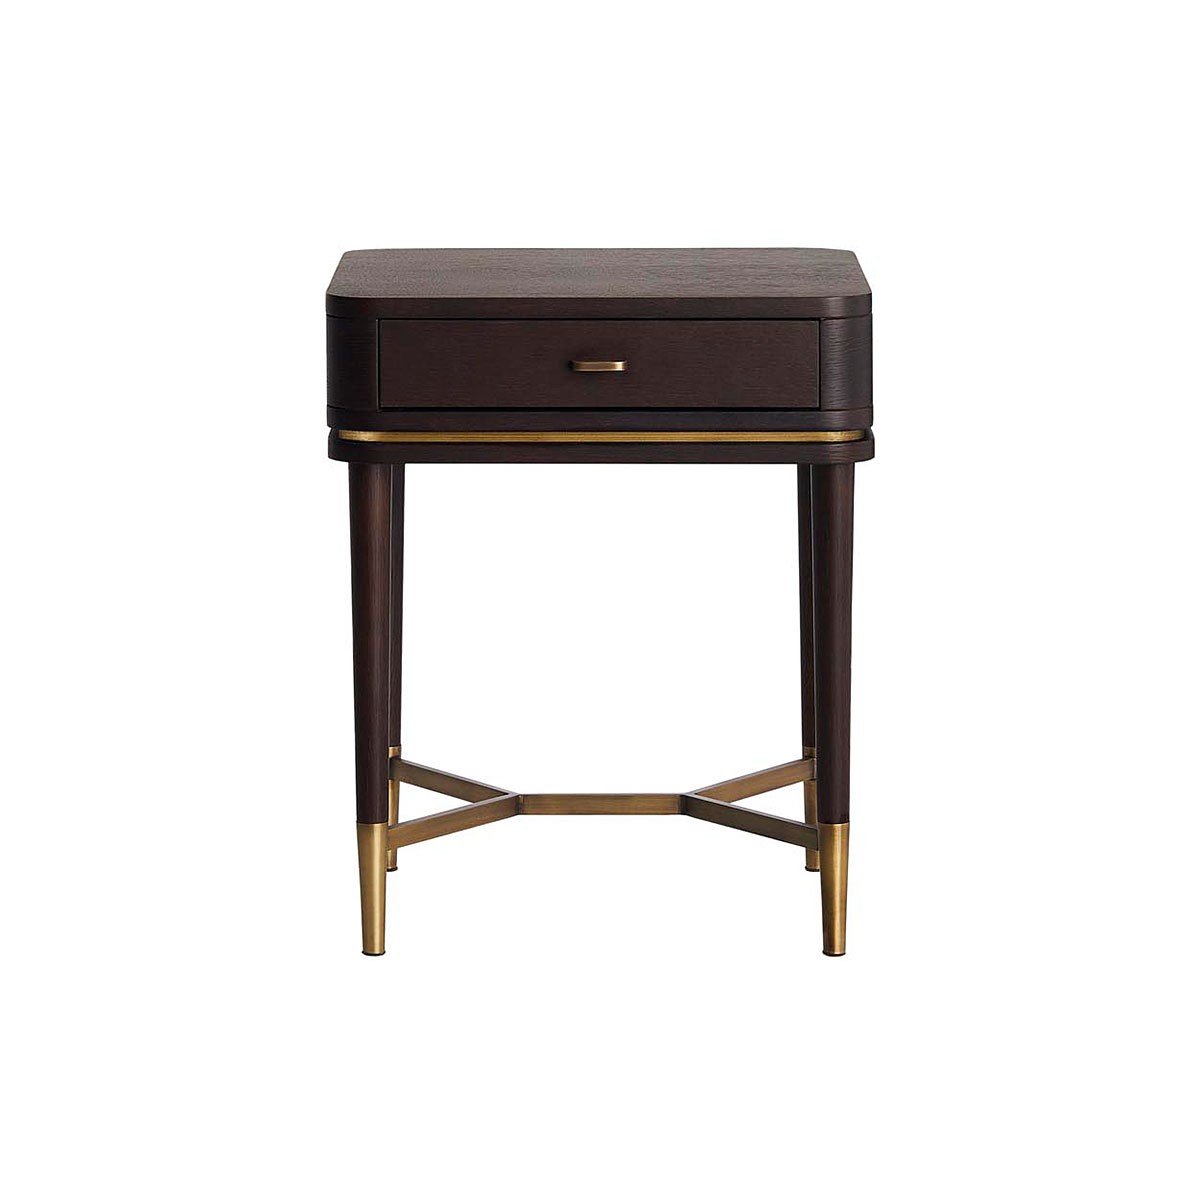 The Augusto Bedside Table